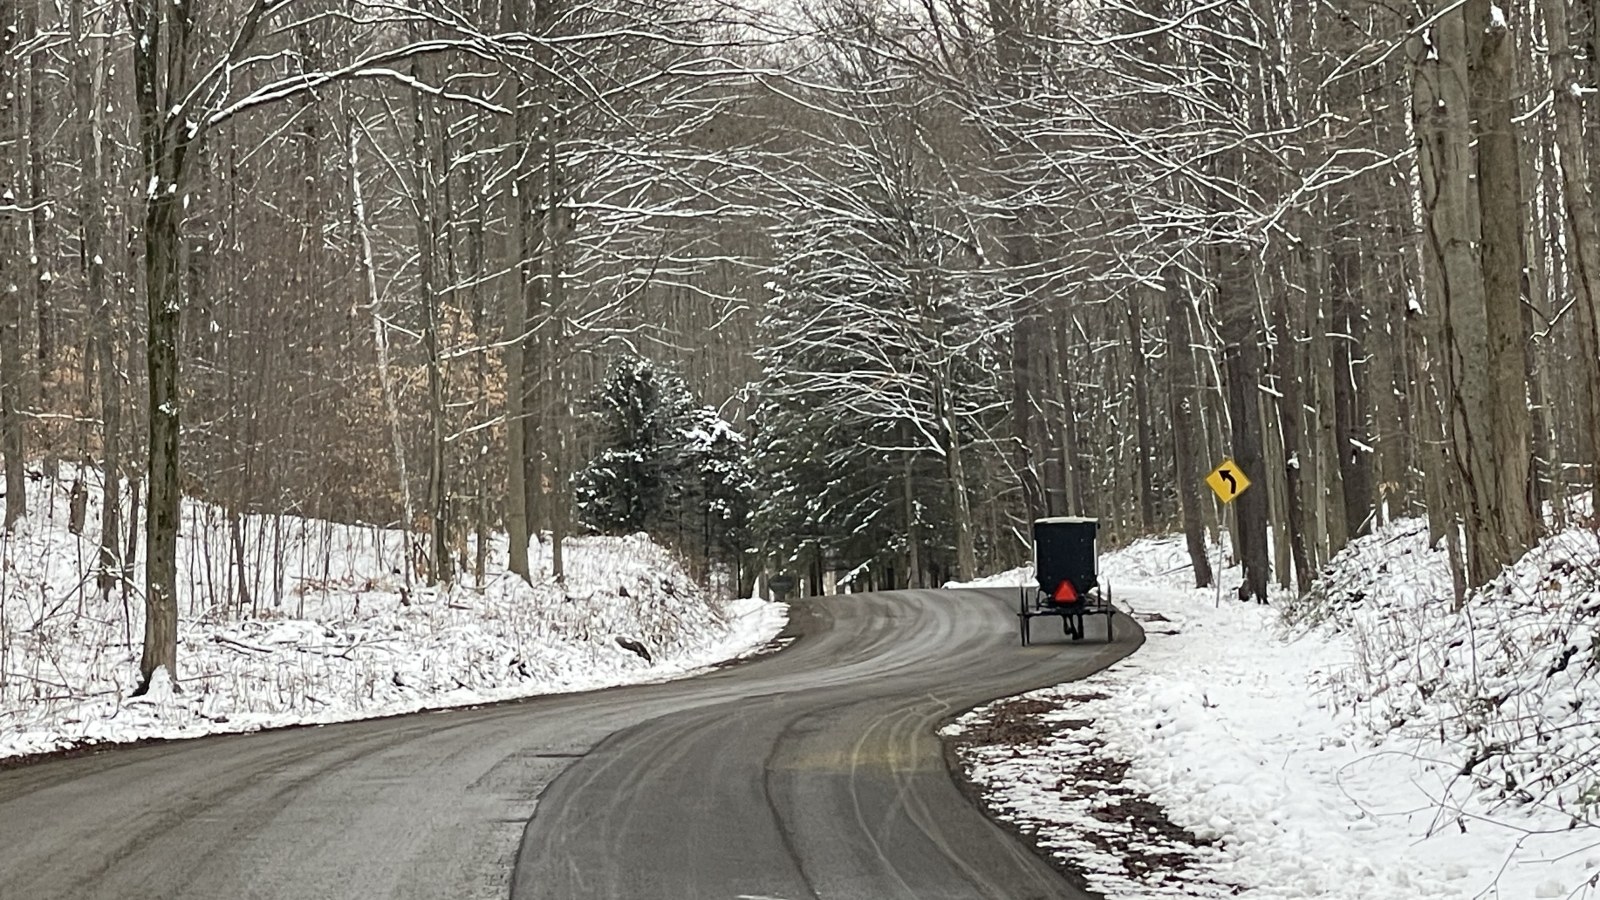 Amish Buggy on a wooded road in winter